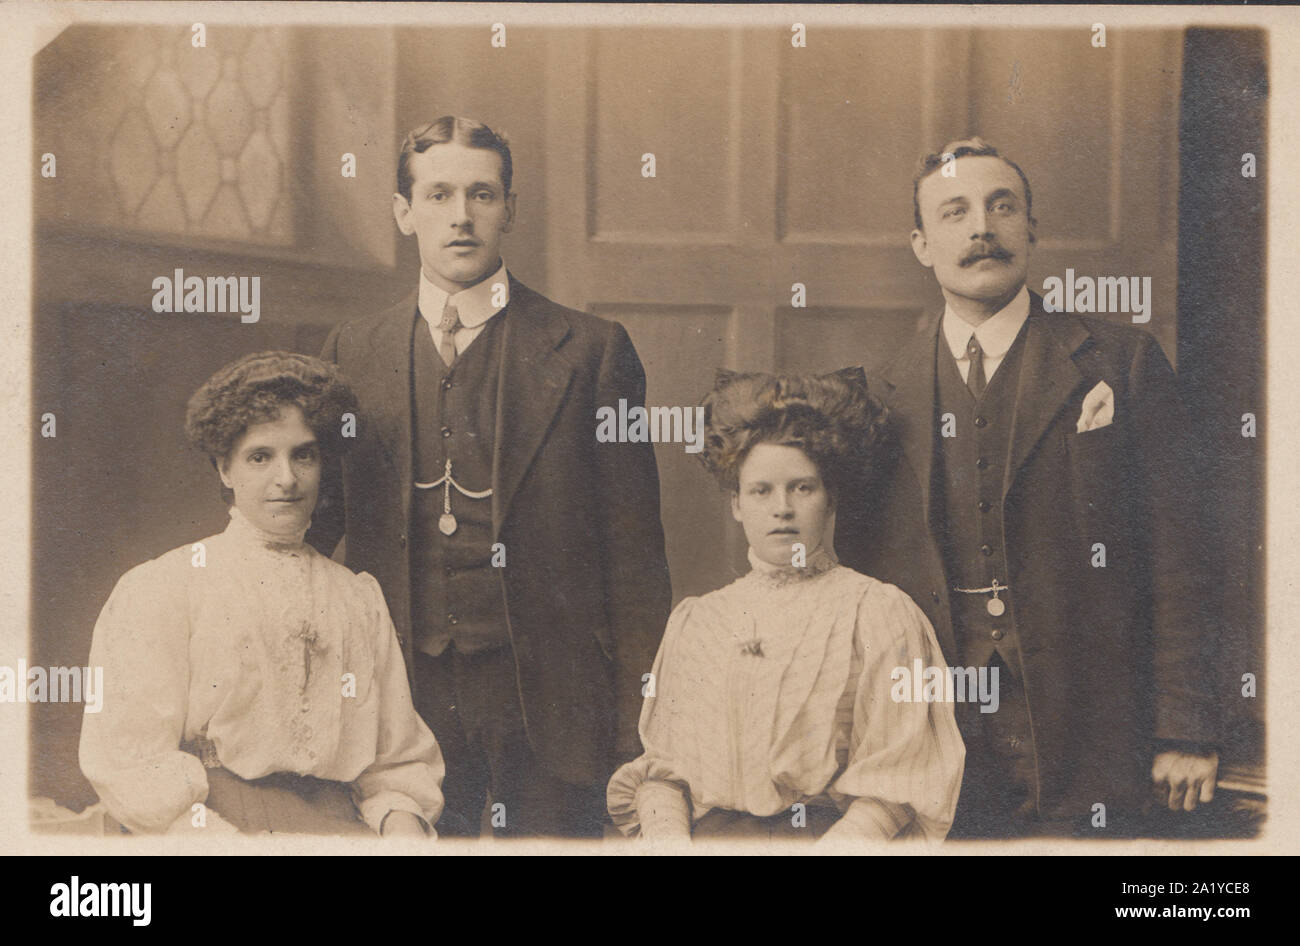 Vintage Early 20th Century Photographic Isle of Man Postcard Showing Two Smartly Dressed Men and Two Women. Stock Photo